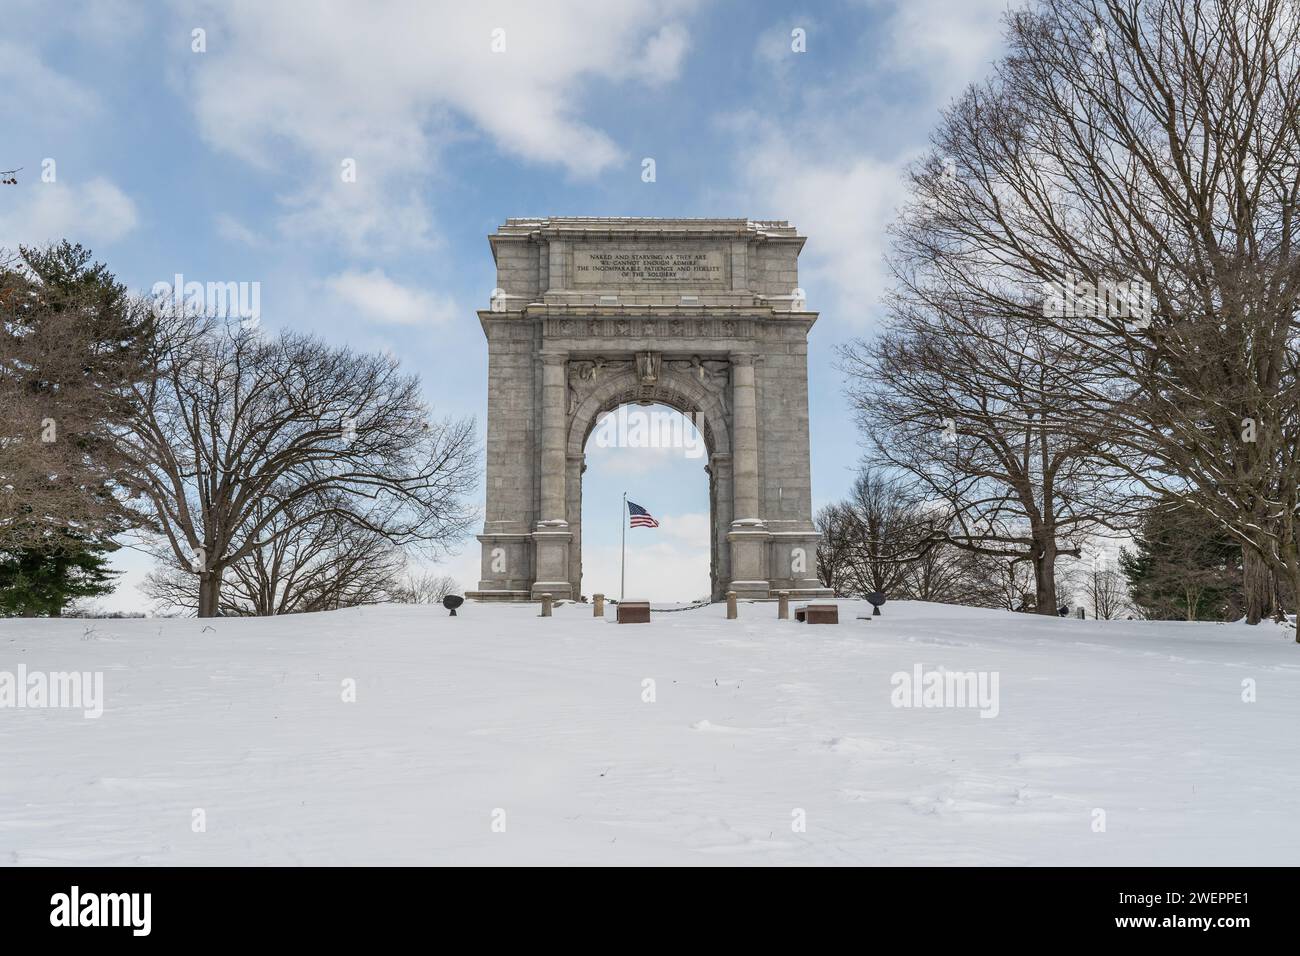 National Memorial Arch in Valley Forge in winter. Stock Photo